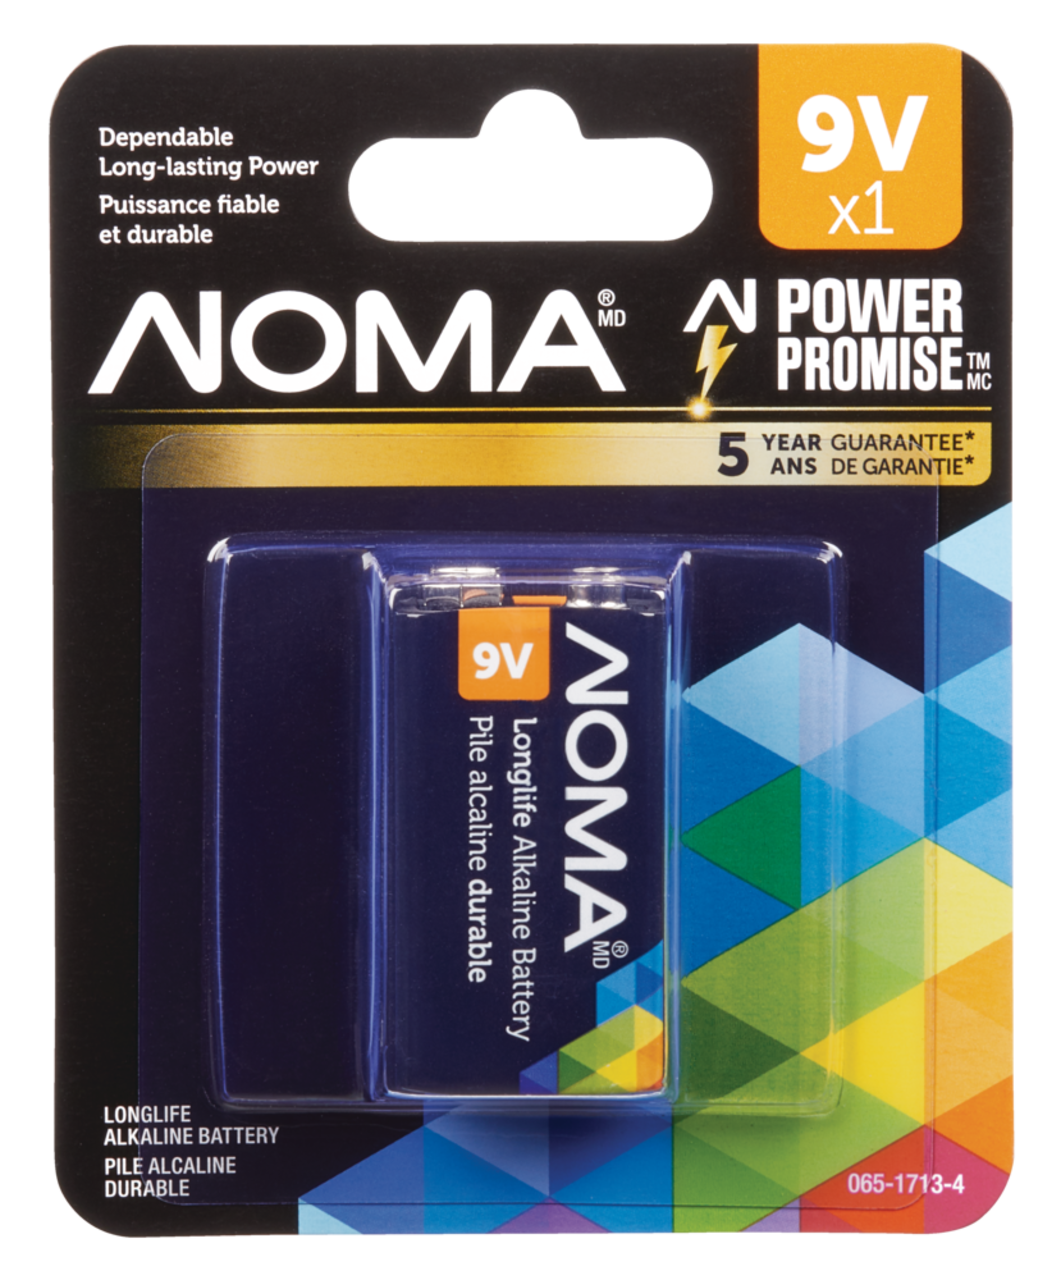 https://media-www.canadiantire.ca/product/fixing/hardware/household-batteries/0651713/noma-alkaline-9v-battery--a6829122-cdf9-4d2d-bfb2-78adb80a912a.png?imdensity=1&imwidth=640&impolicy=mZoom